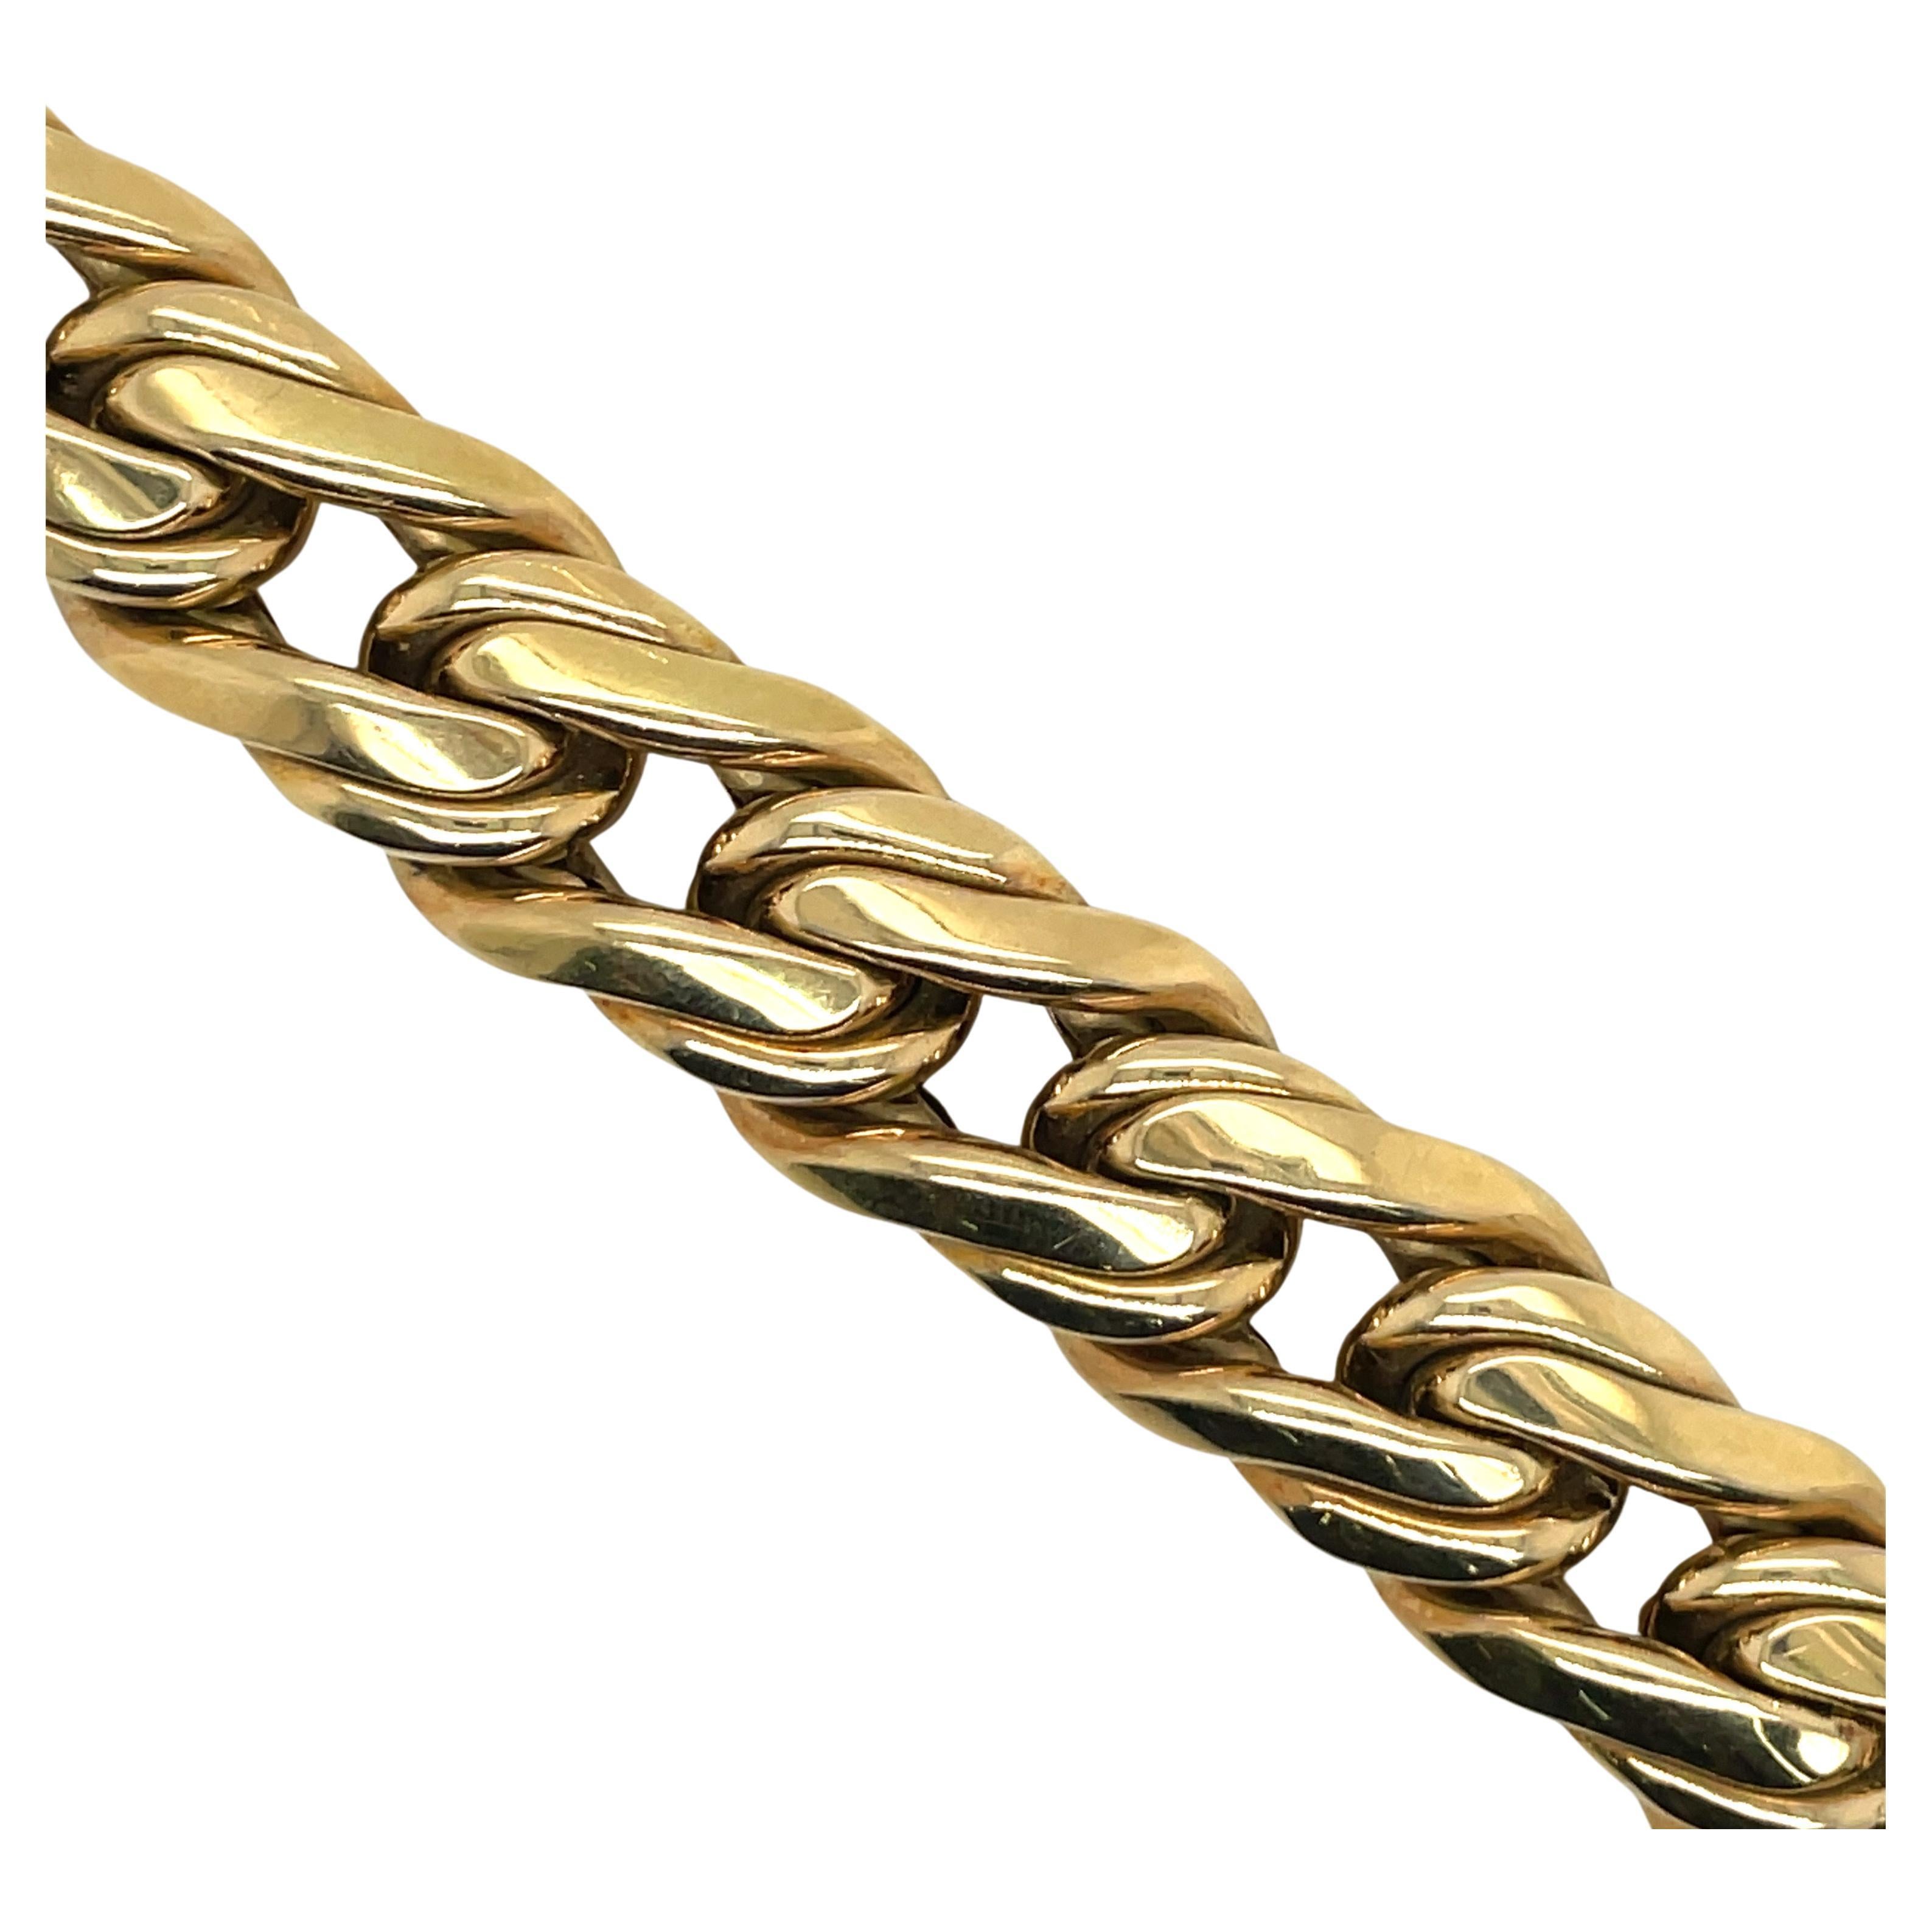 14 Karat Yellow Gold Link bracelet weighing 32.5 grams, made in Italy.
More Link bracelets in stock.
Search Harbor Diamonds.